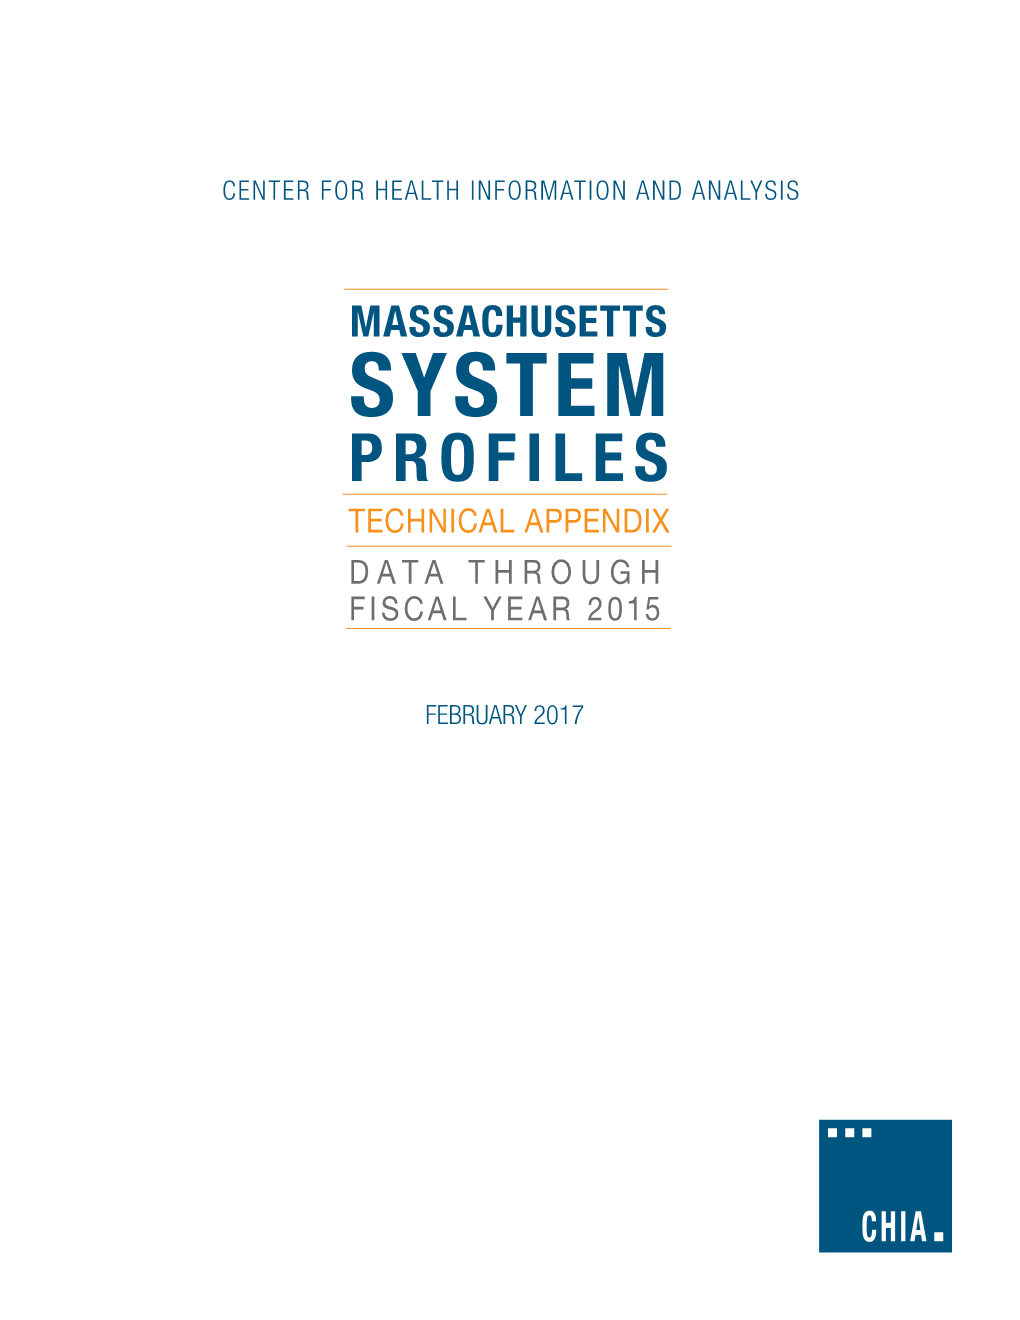 System Profiles Technical Appendix Data Through Fiscal Year 2015